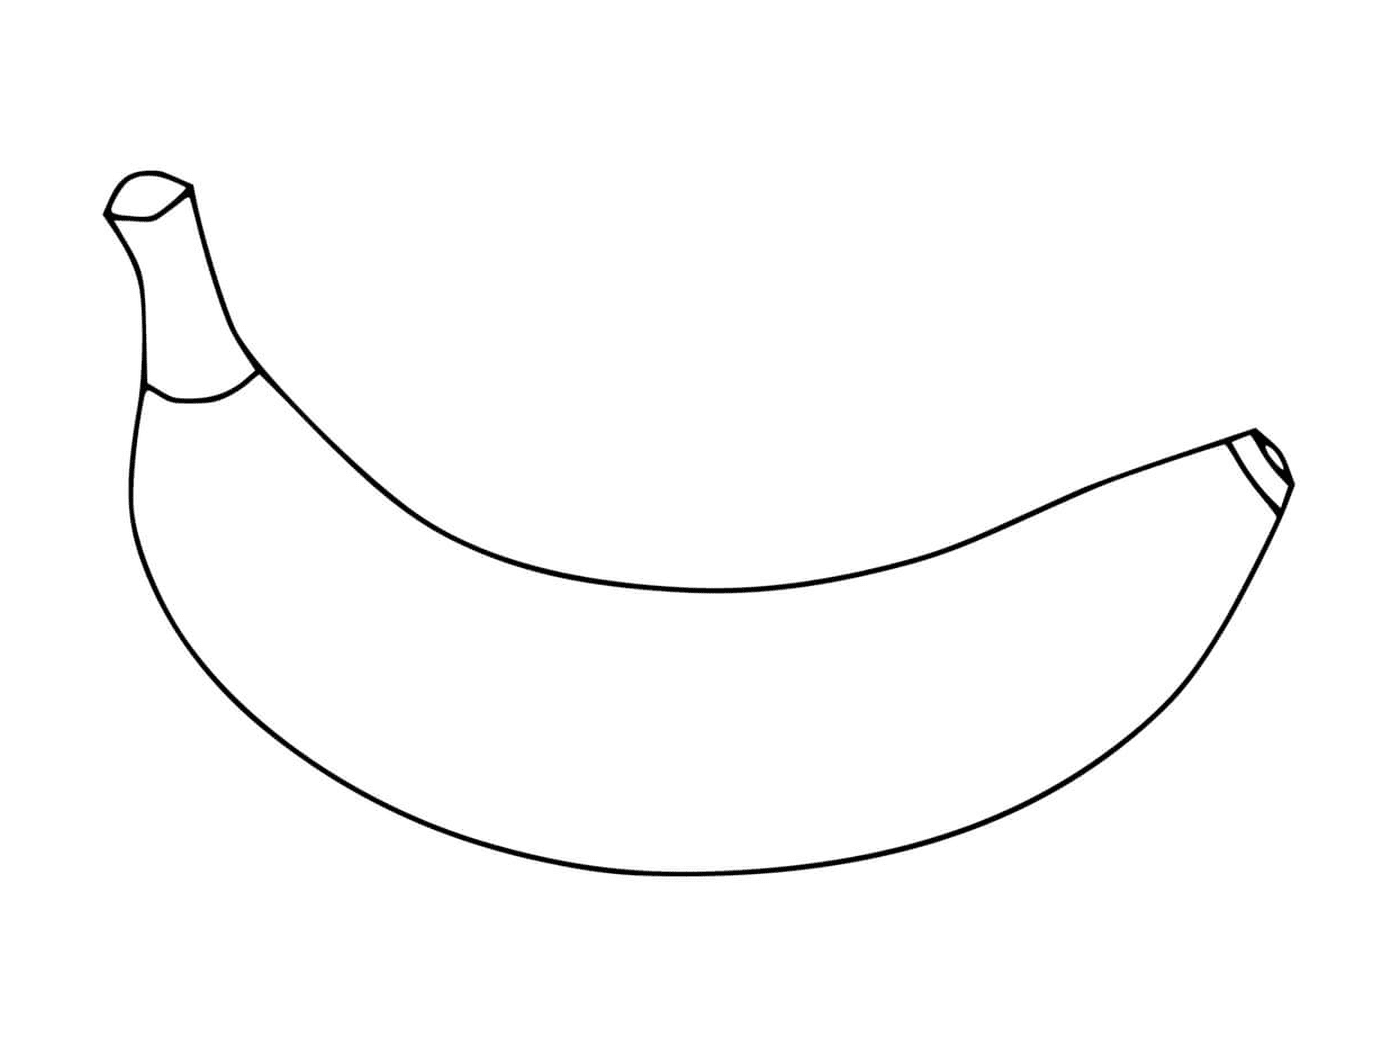  A picture of a banana 